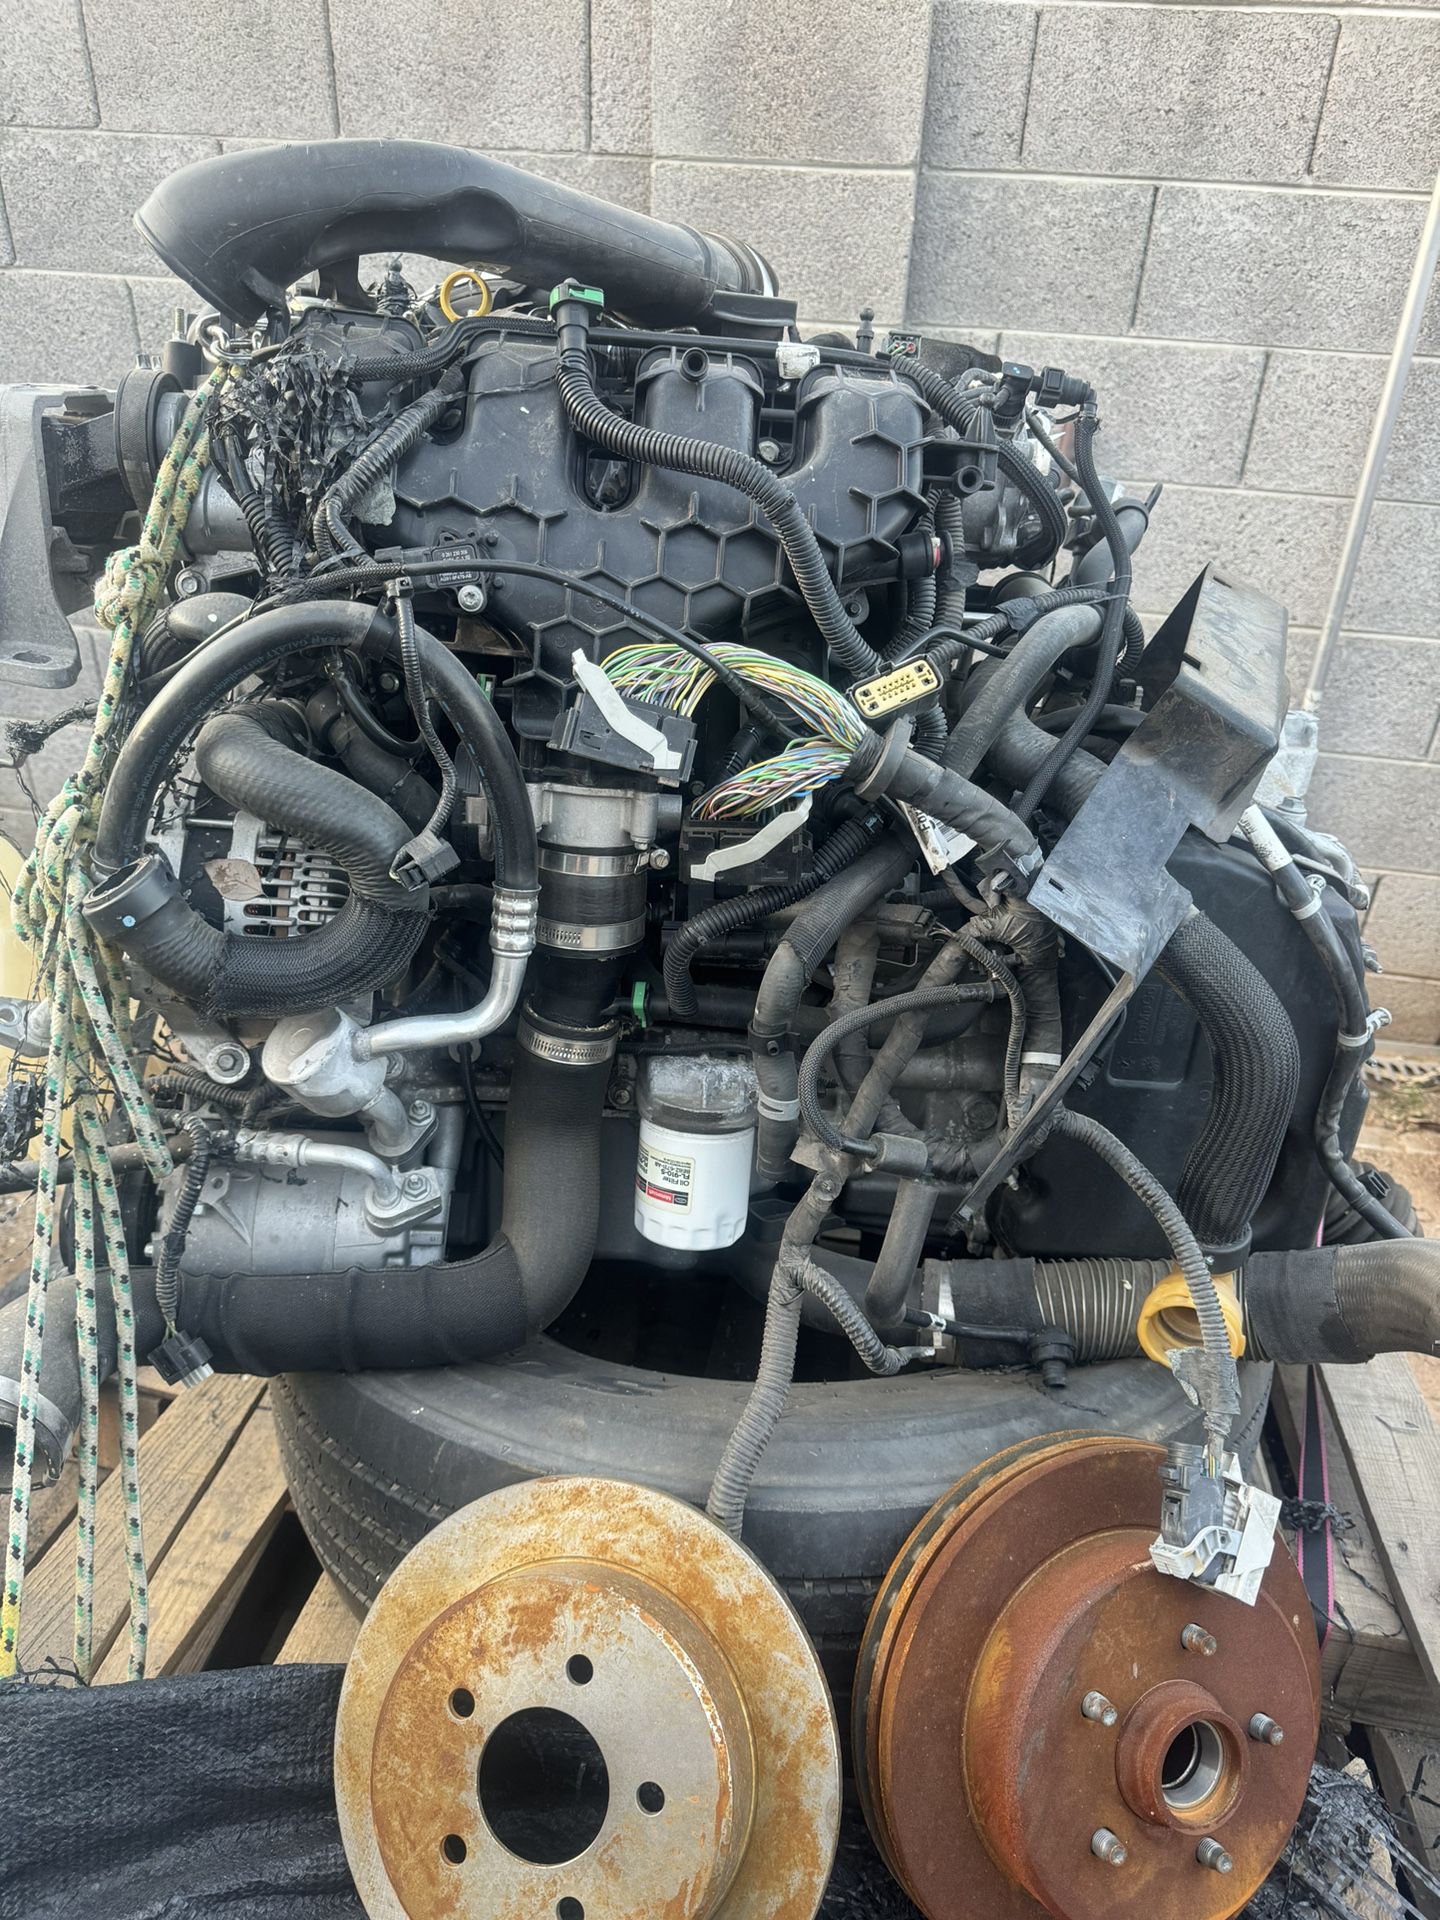 Ford 2.0 L Turbo Motor And All-Wheel-Drive Transmission